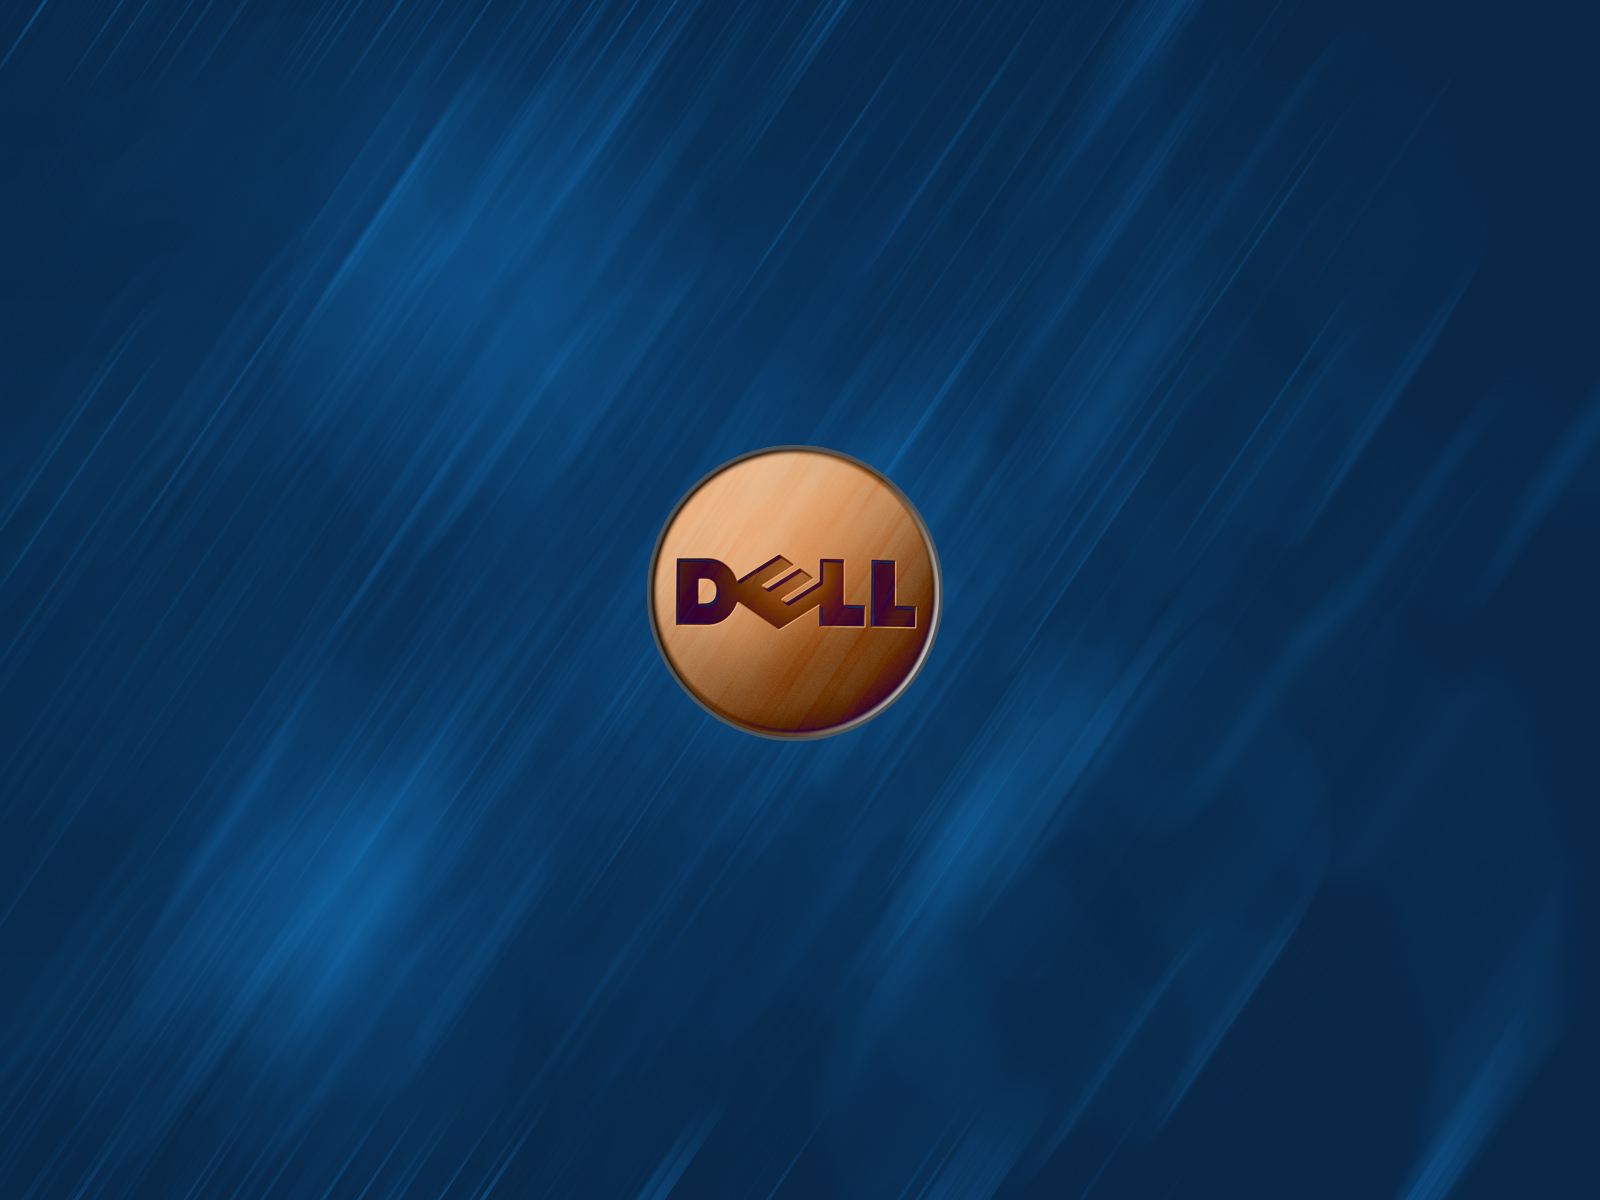 Dell Wallpaper Backgrounds Hd Dell Backgrounds & Dell - Dell , HD Wallpaper & Backgrounds